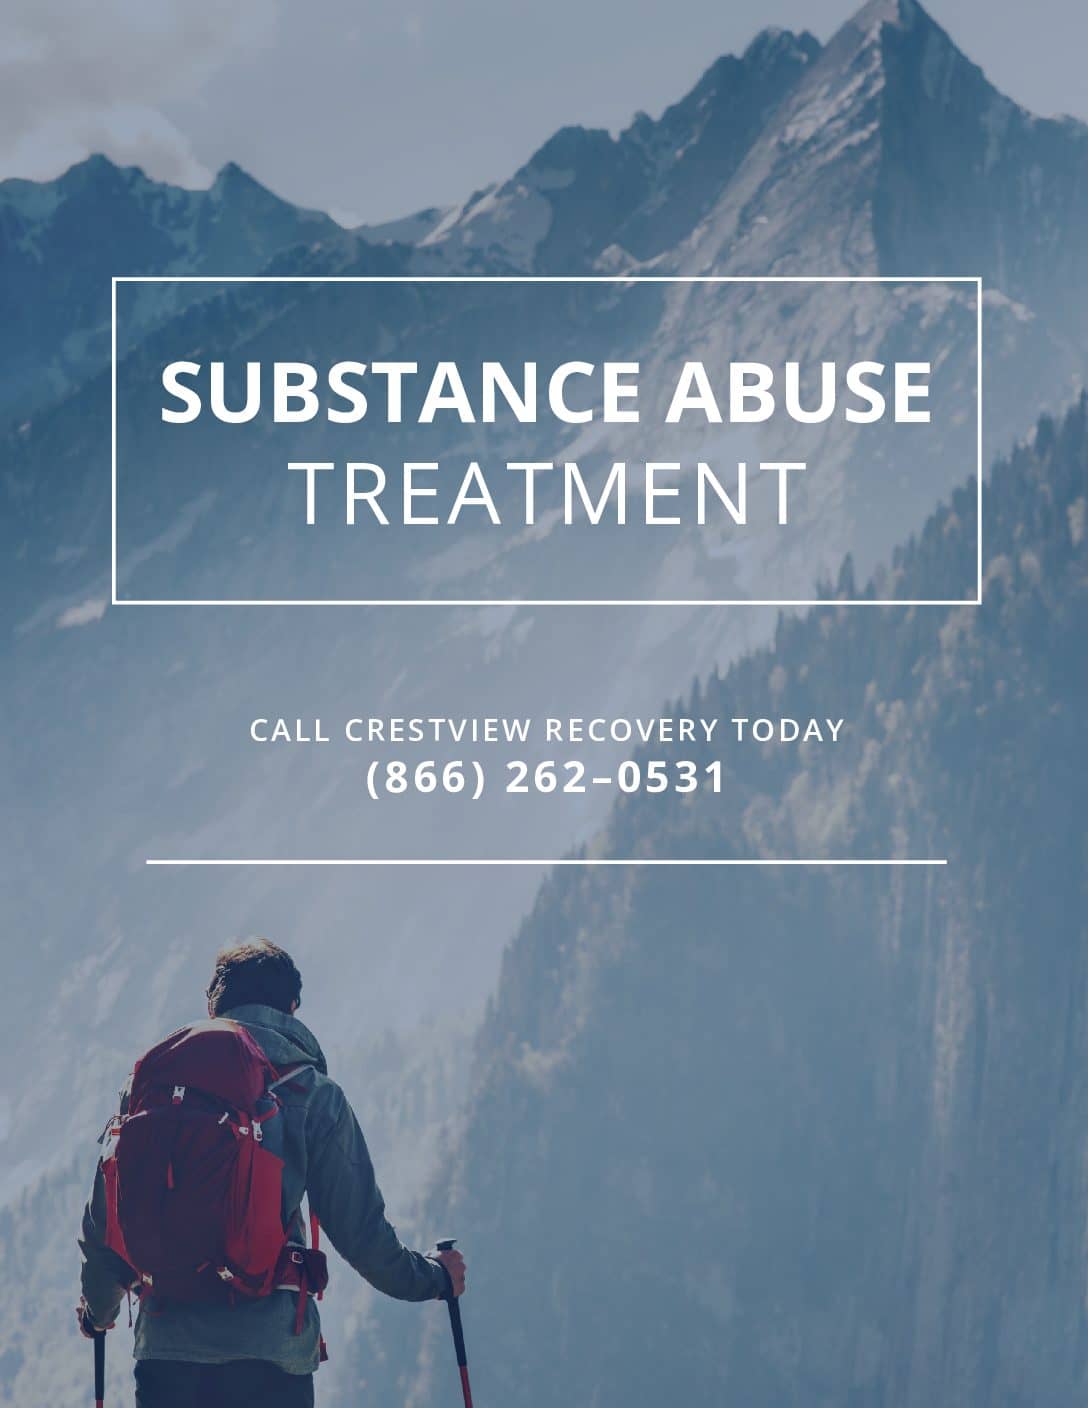 Crestview Recovery Substance Abuse Treatment 1 Pdf